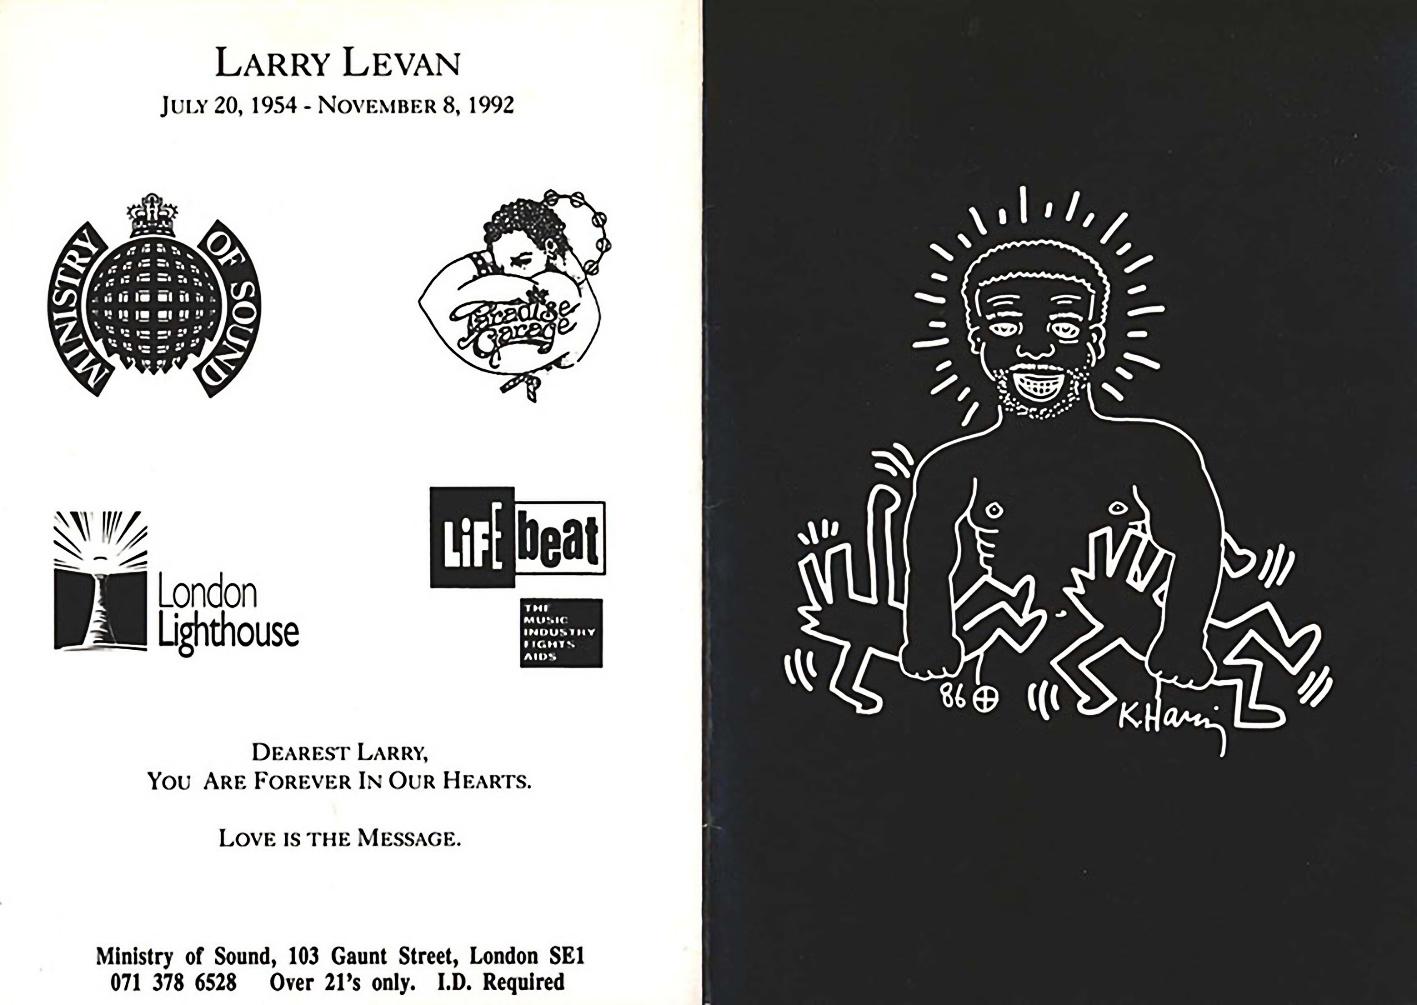 Keith Haring Larry Levan announcement 1992 - Pop Art Print by (after) Keith Haring